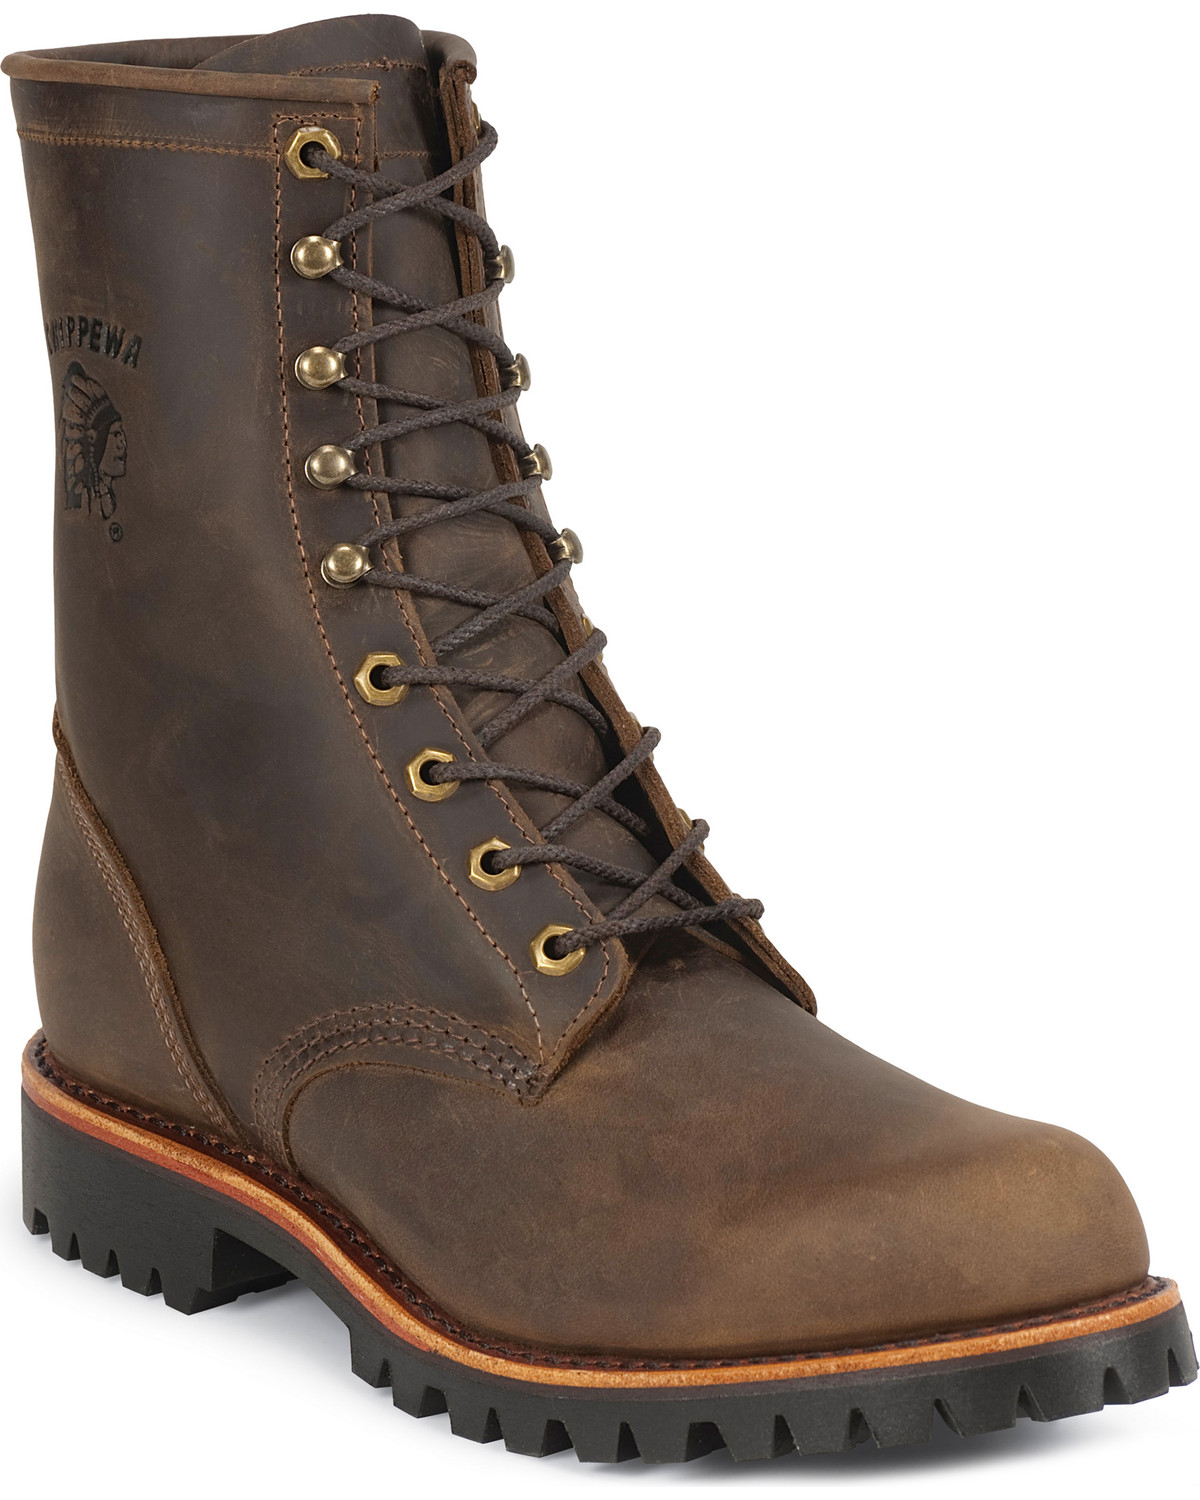 leather lace up work boots